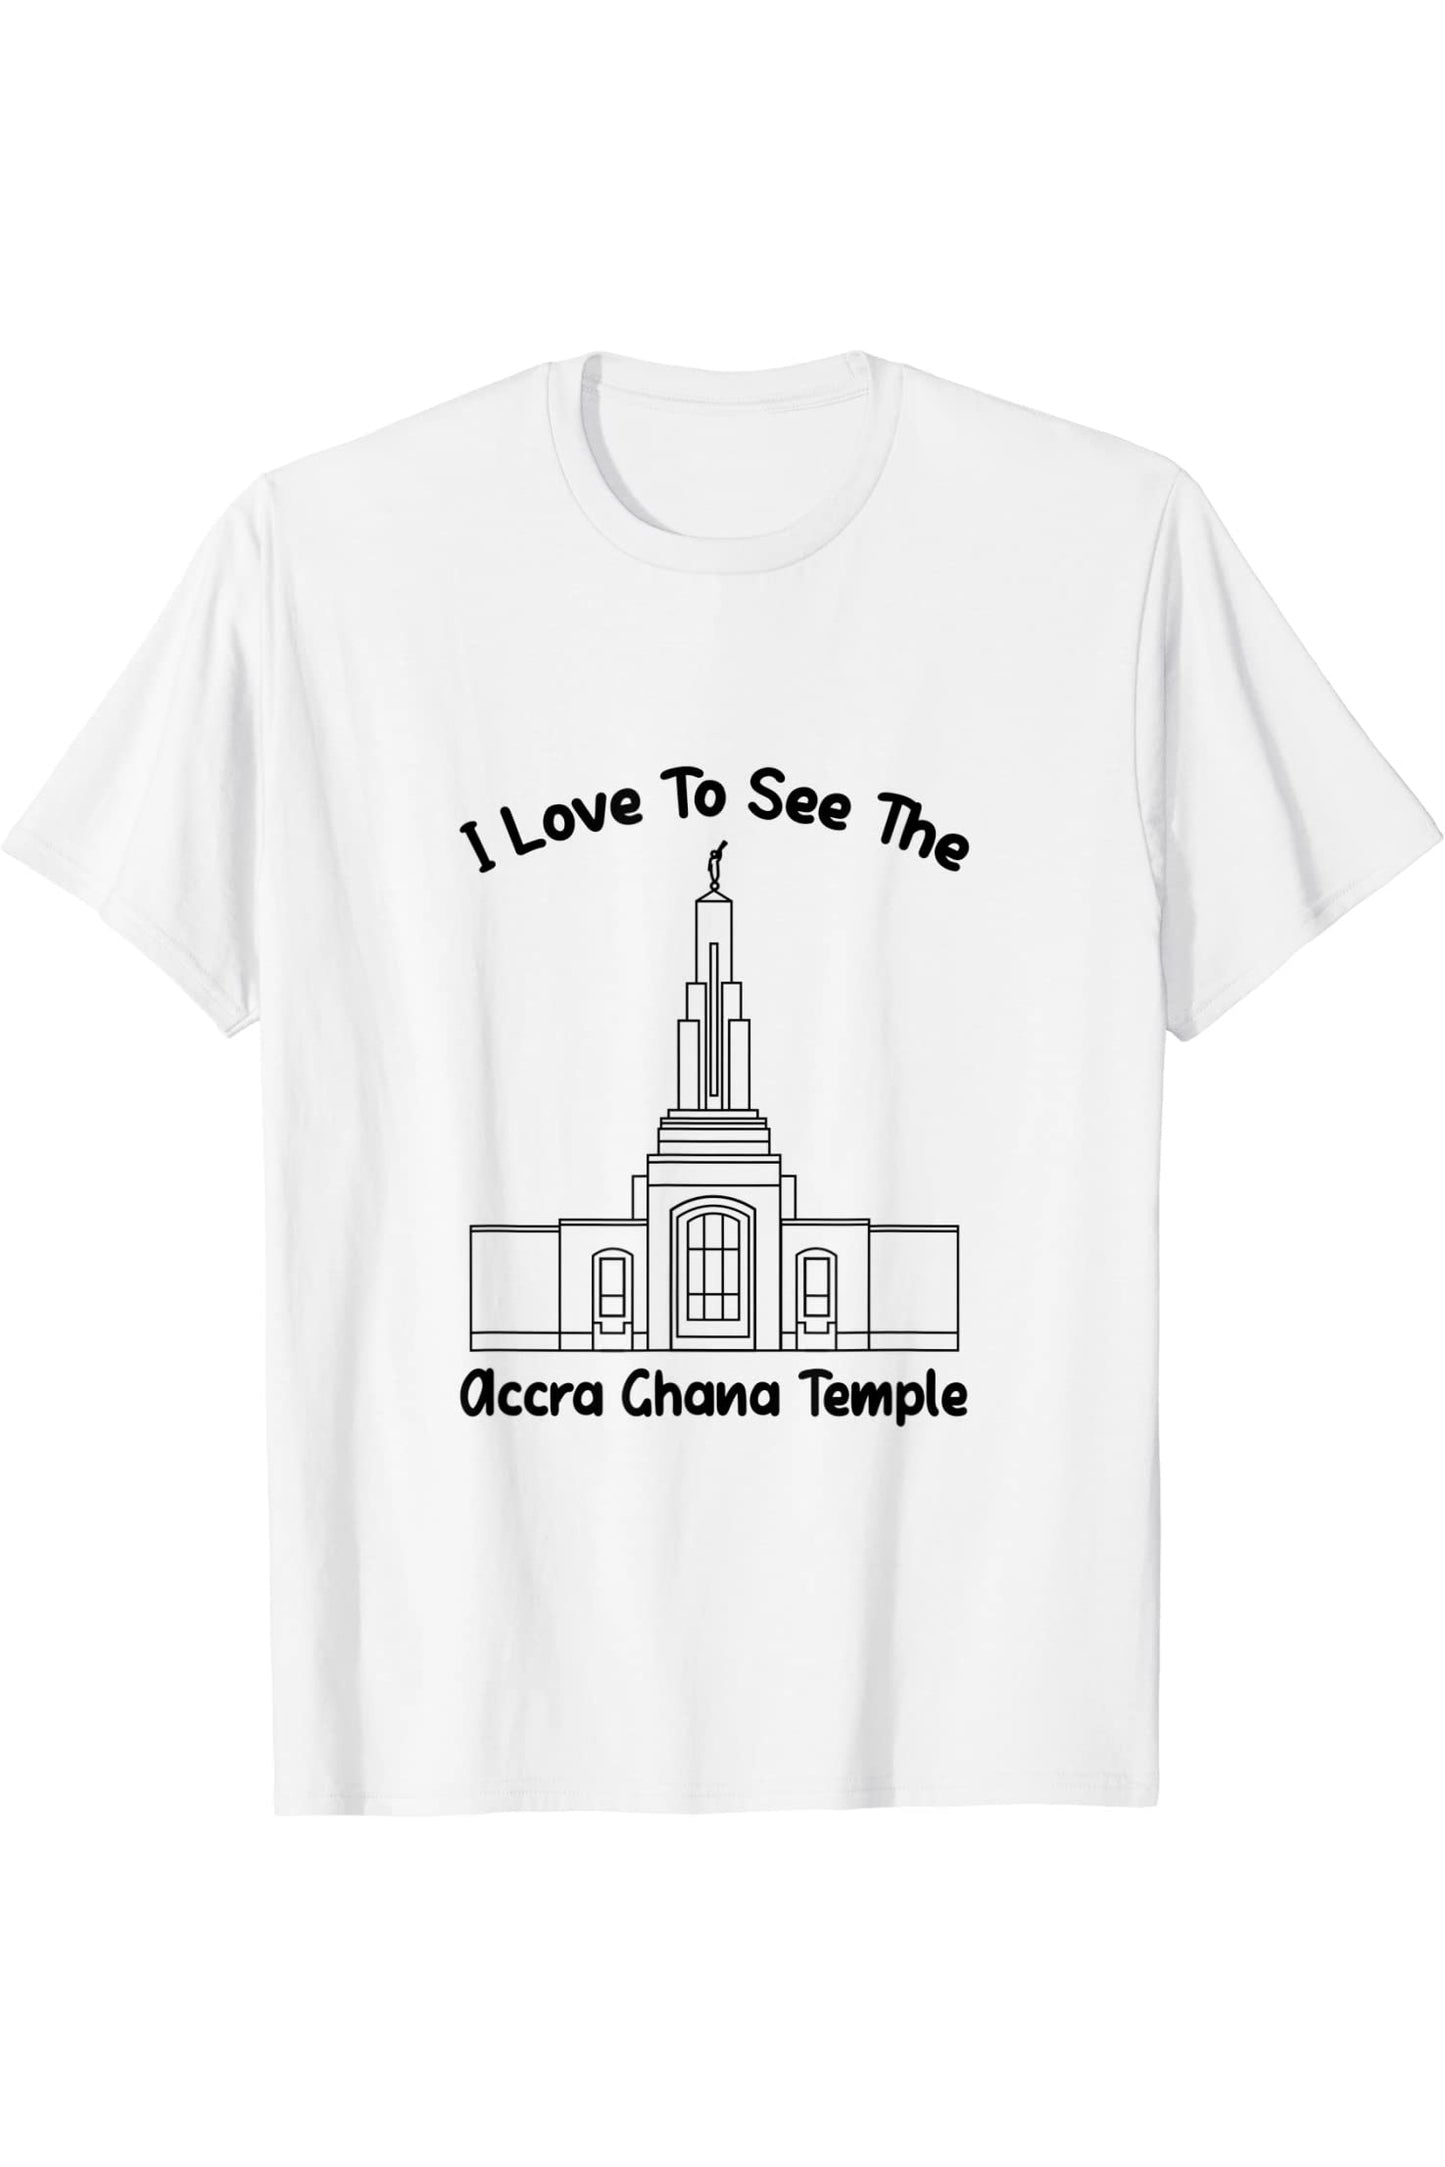 Accra Ghana Temple T-Shirt - Primary Style (English) US